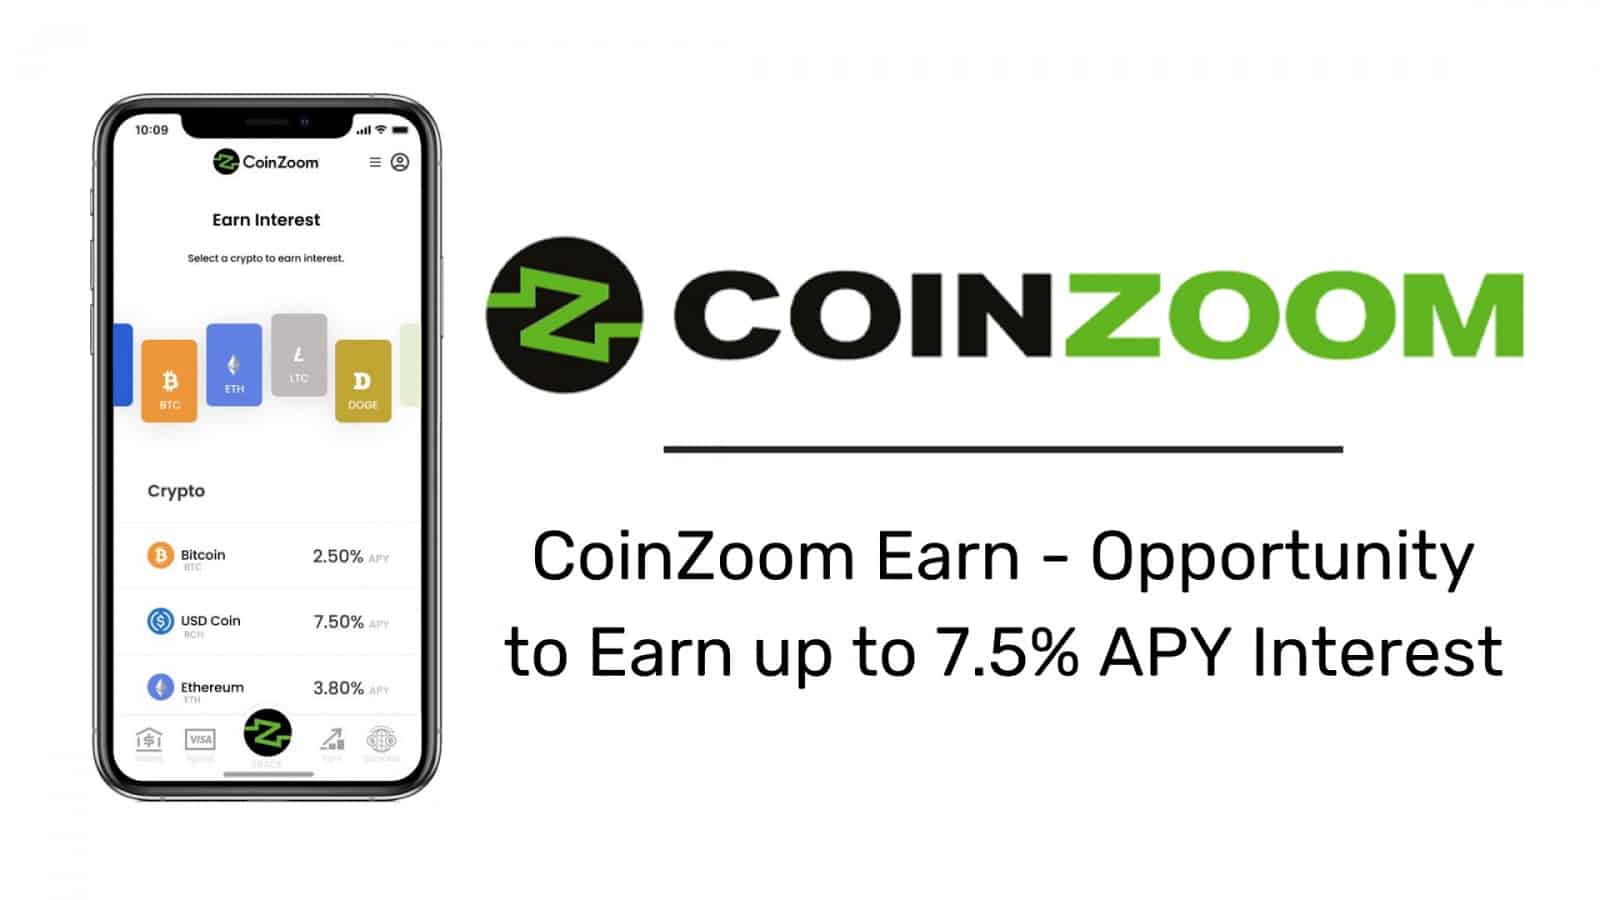 Coinzoom-launching-coinzoom-earn-with-up-to-7.5%-apy-interest-on-cryptocurrencies-and-usd-holdings